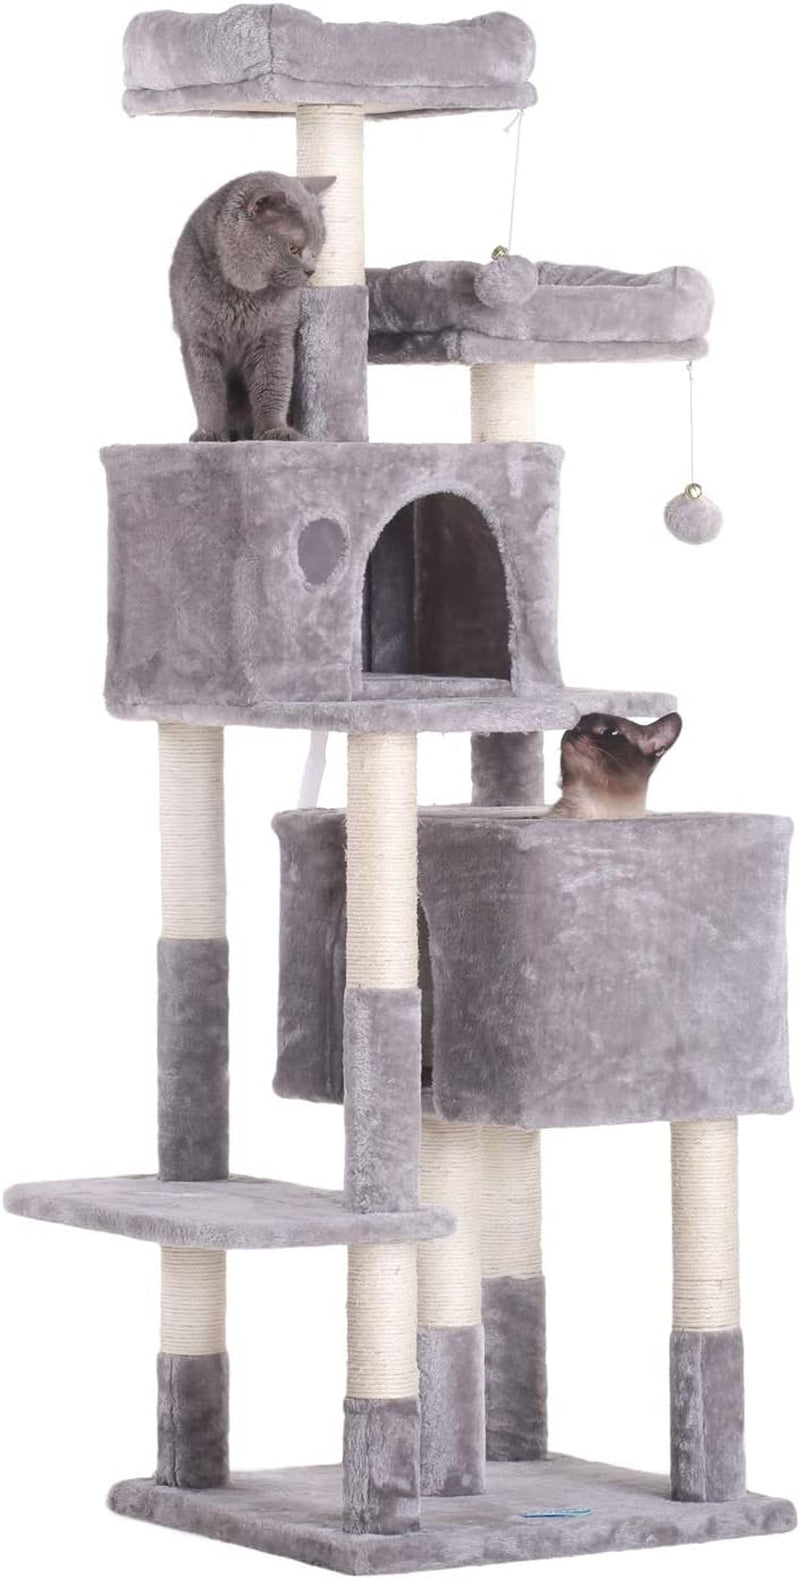 Hey-Bro 60 Inches Large Multi-Level Cat Tree Condo Furniture with Sisal-Covered Scratching Posts, 2 Plush Condos, 2 Plush Perches, for Kittens, Cats and Pets, Light Gray MPJ012W